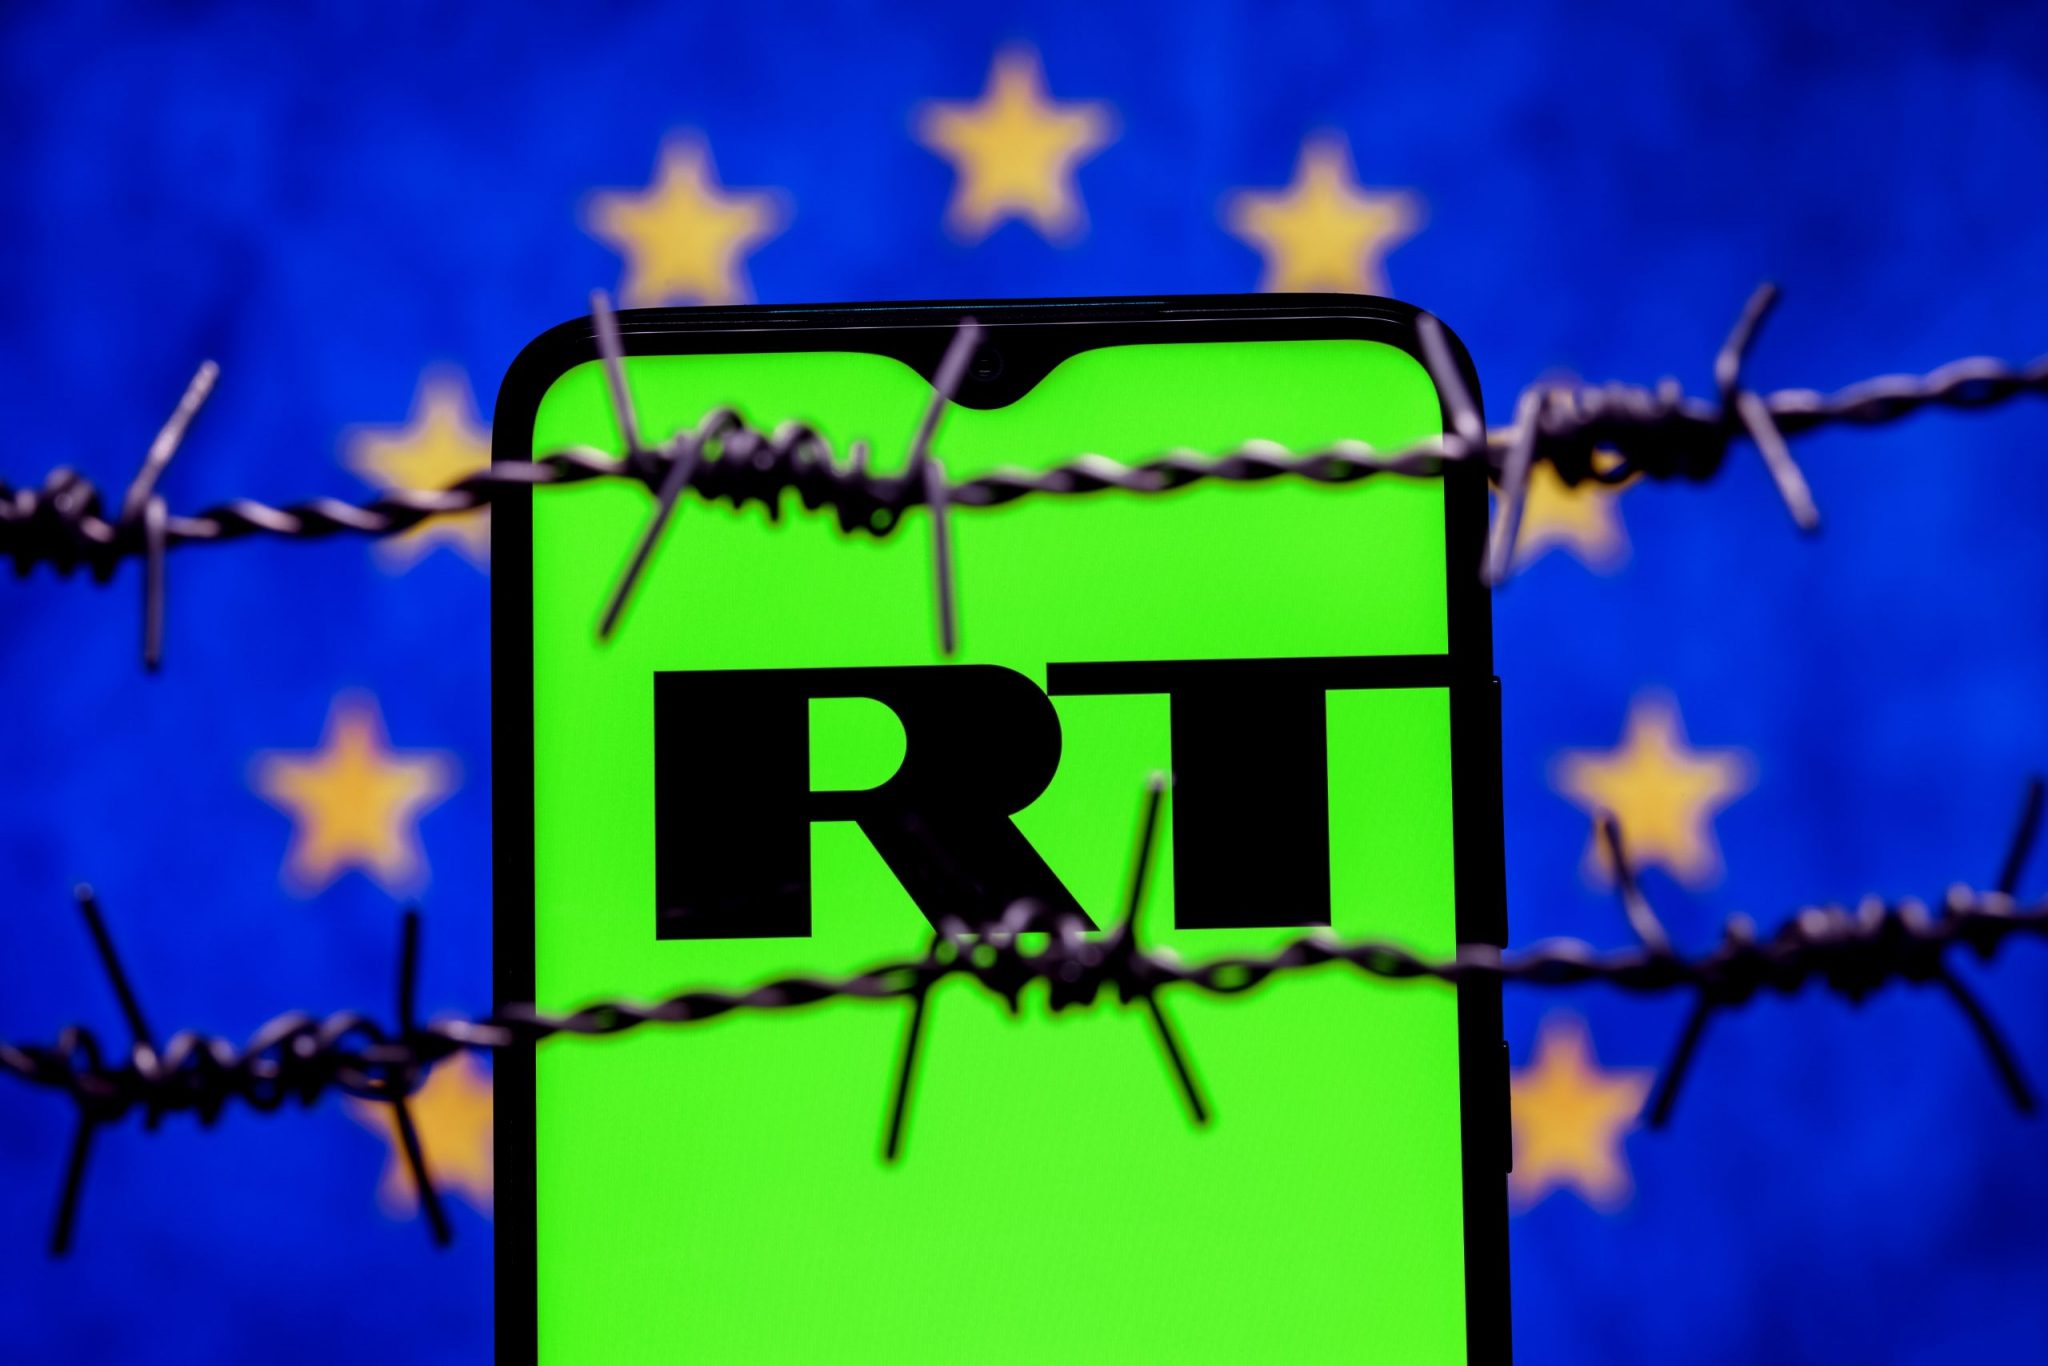 Smartphone with RT (Russia Today) logo on background of flag of European Union behind barbed wire. Russia Today network banning in EU